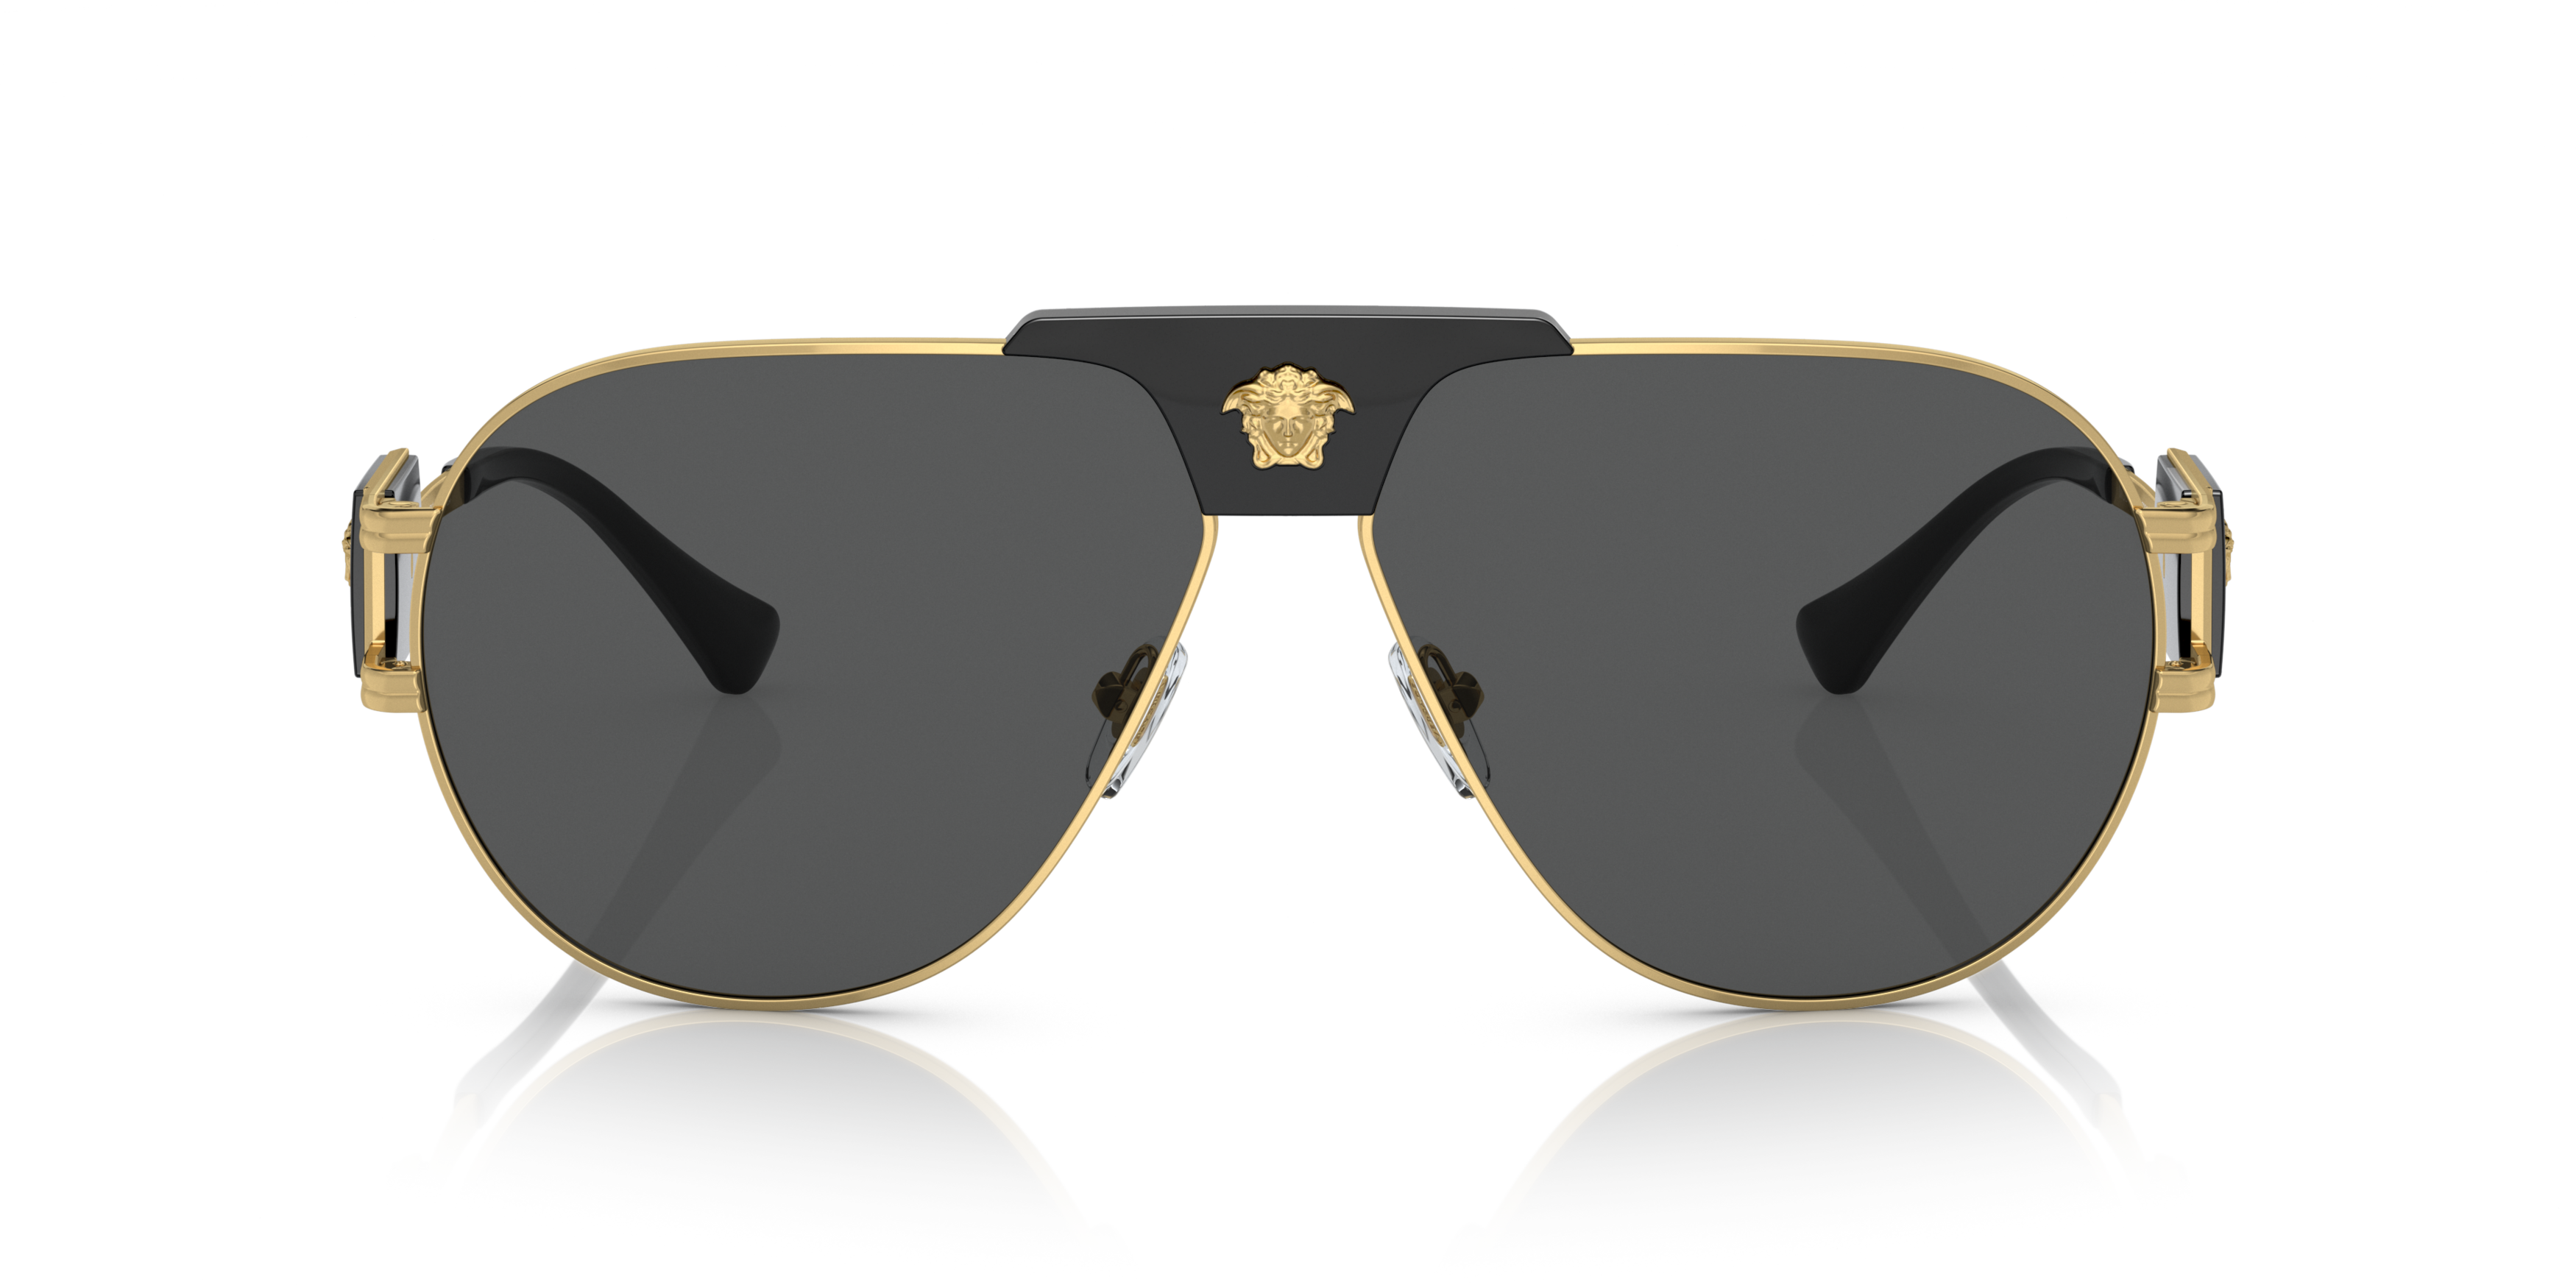 [products.image.front] Versace 0VE2252 100287 Sonnenbrille